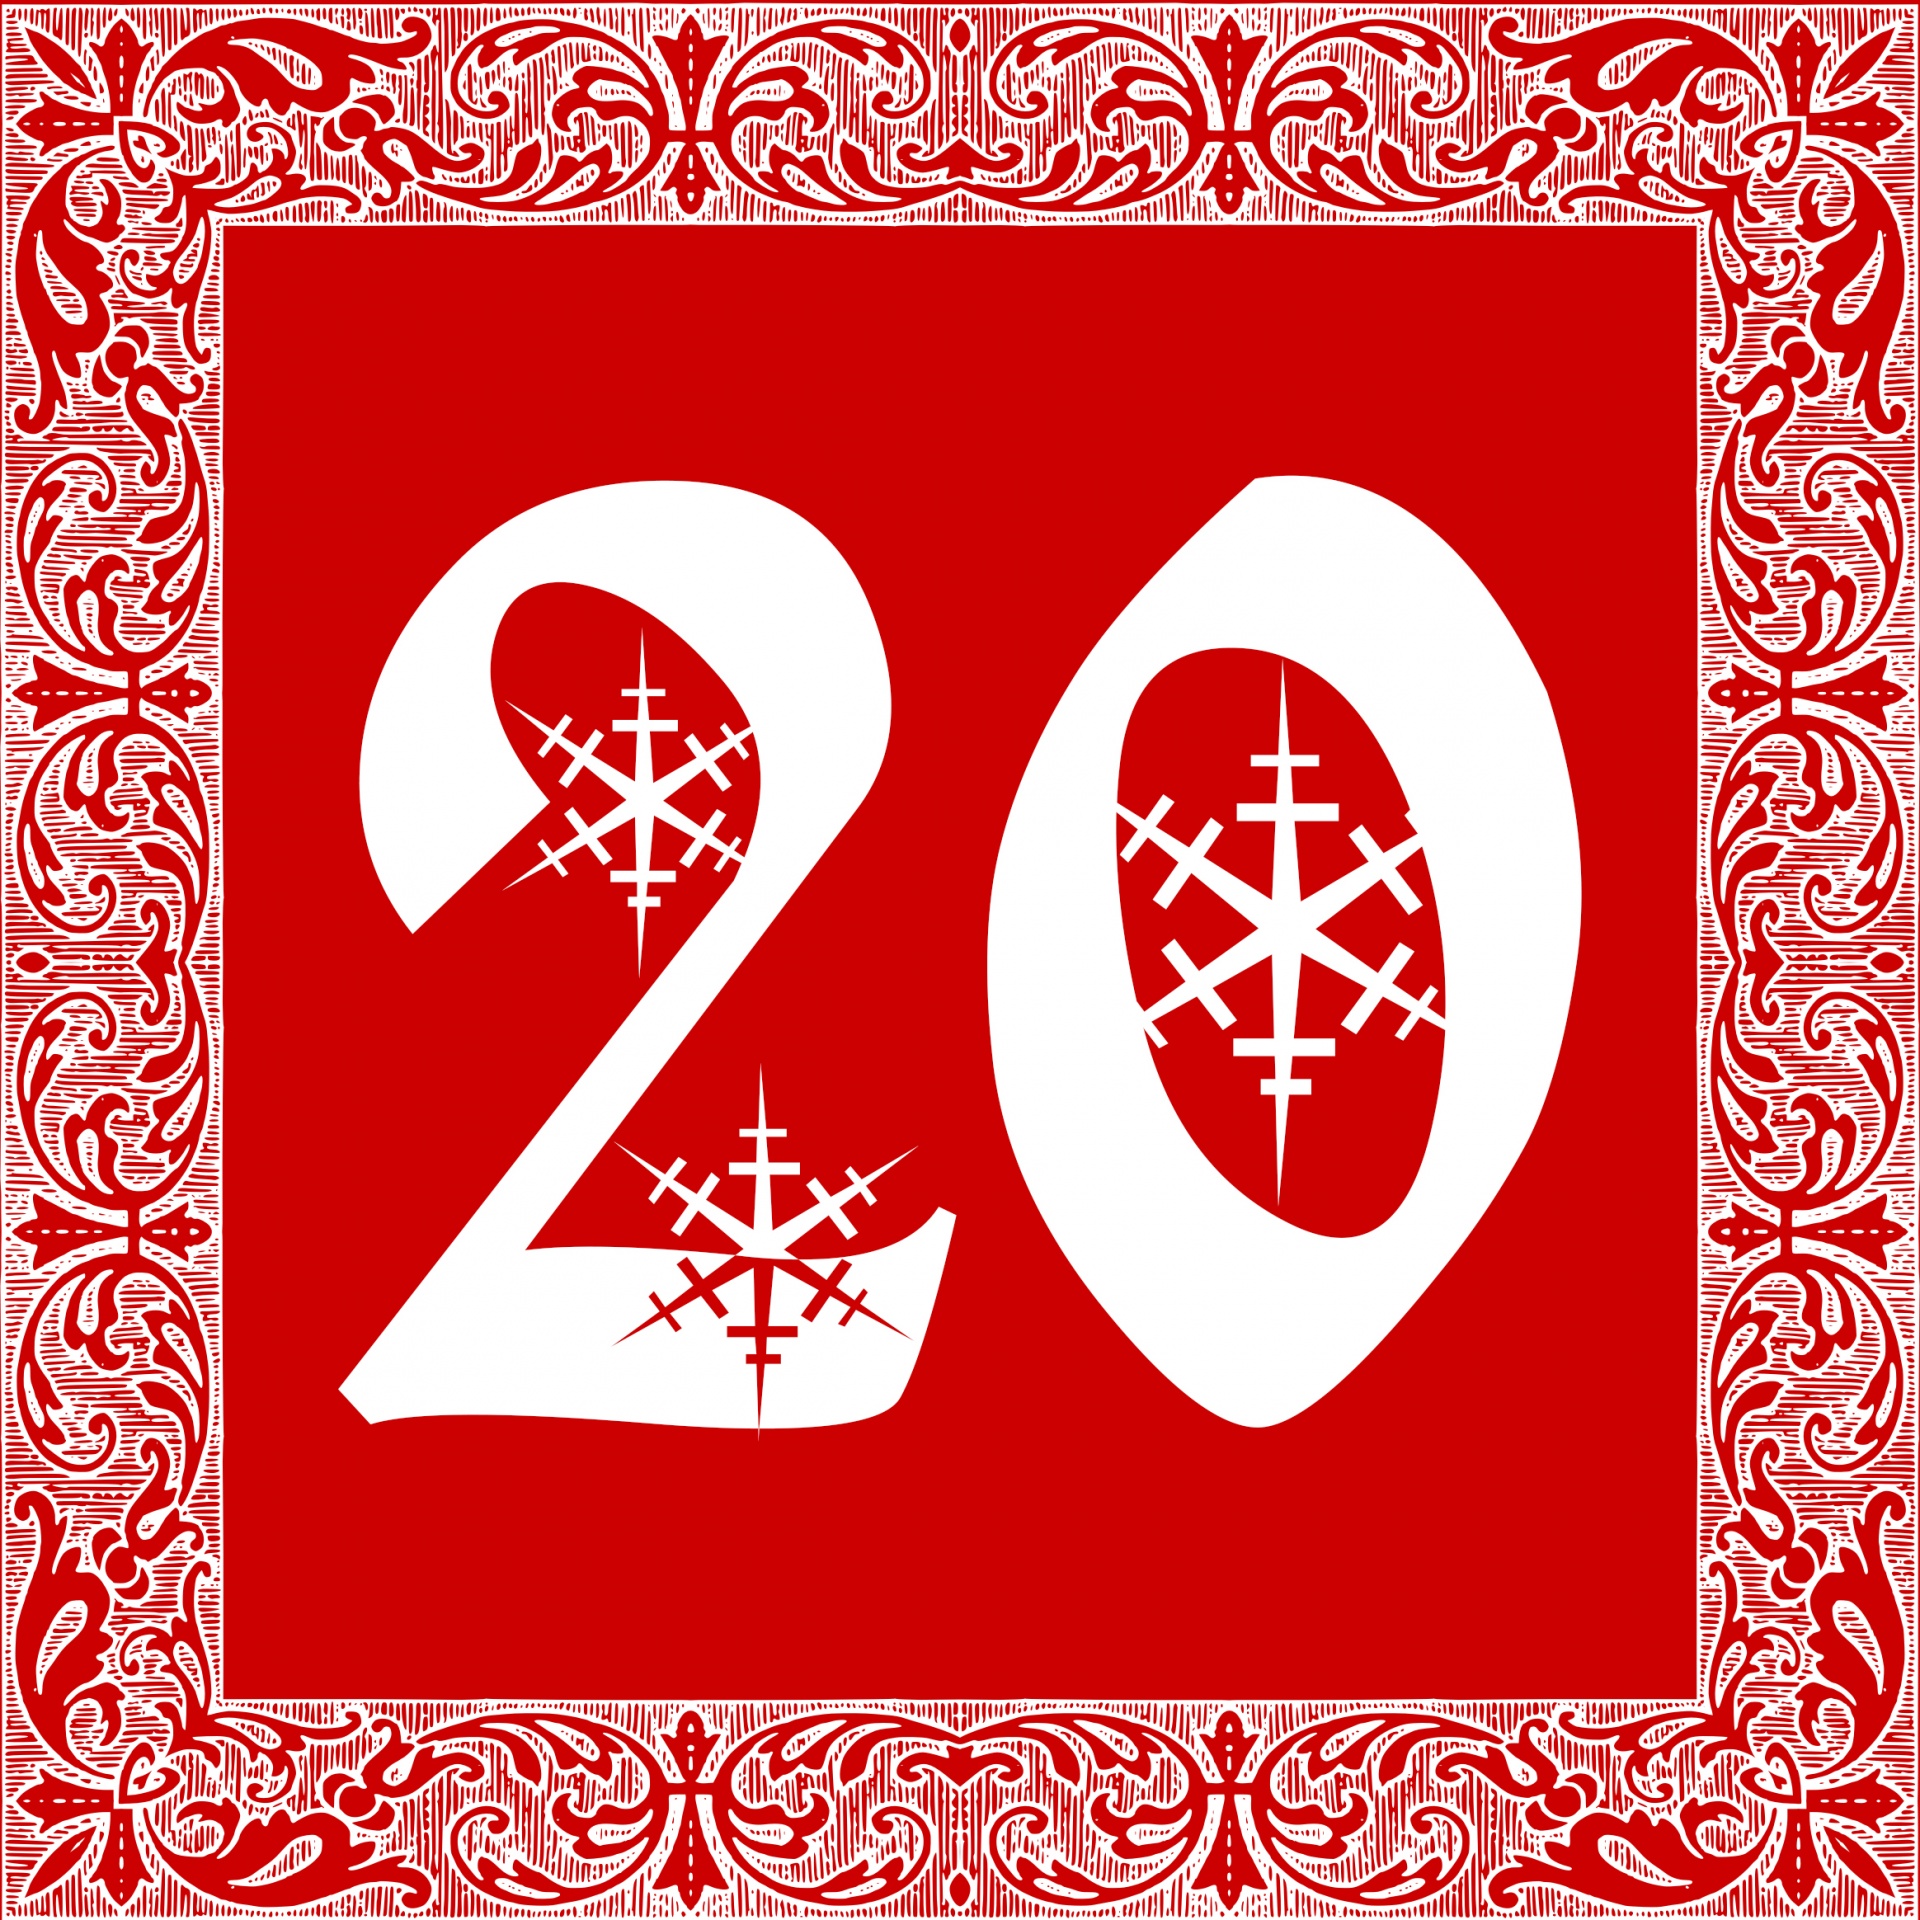 2 dimensional craft ready advent calendar for holiday countdown to Christmas. individual tiles